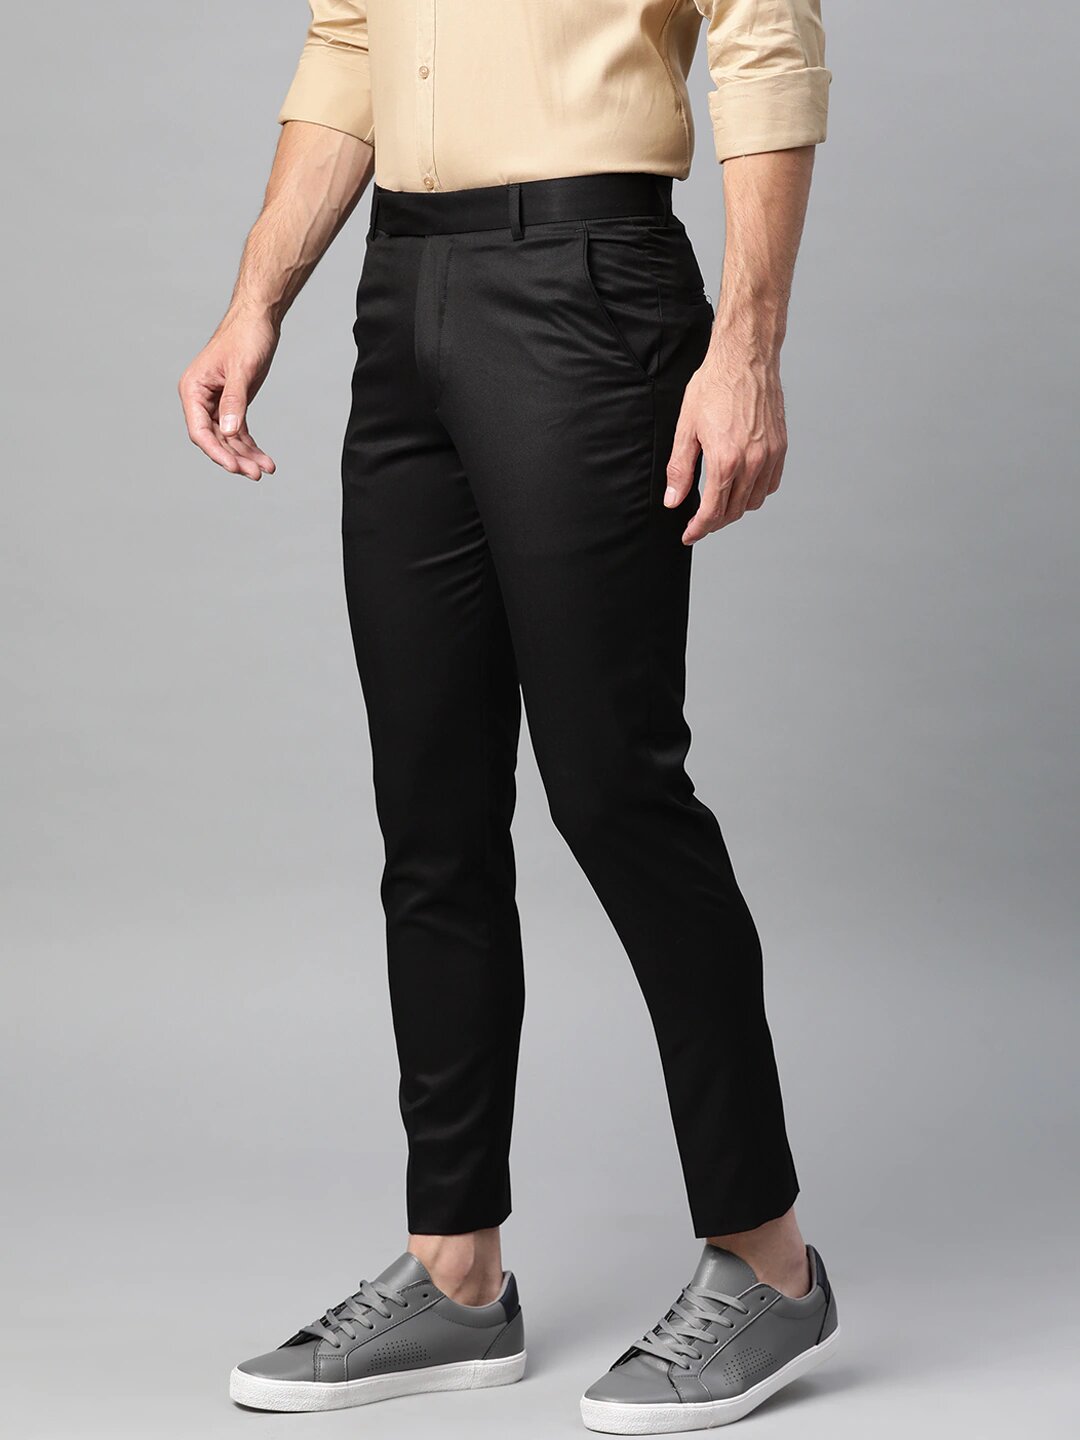 Ankle Pants Roll Up Trousers 3806 | Men fashion casual outfits, Mens pants  fashion, Mens clothing styles